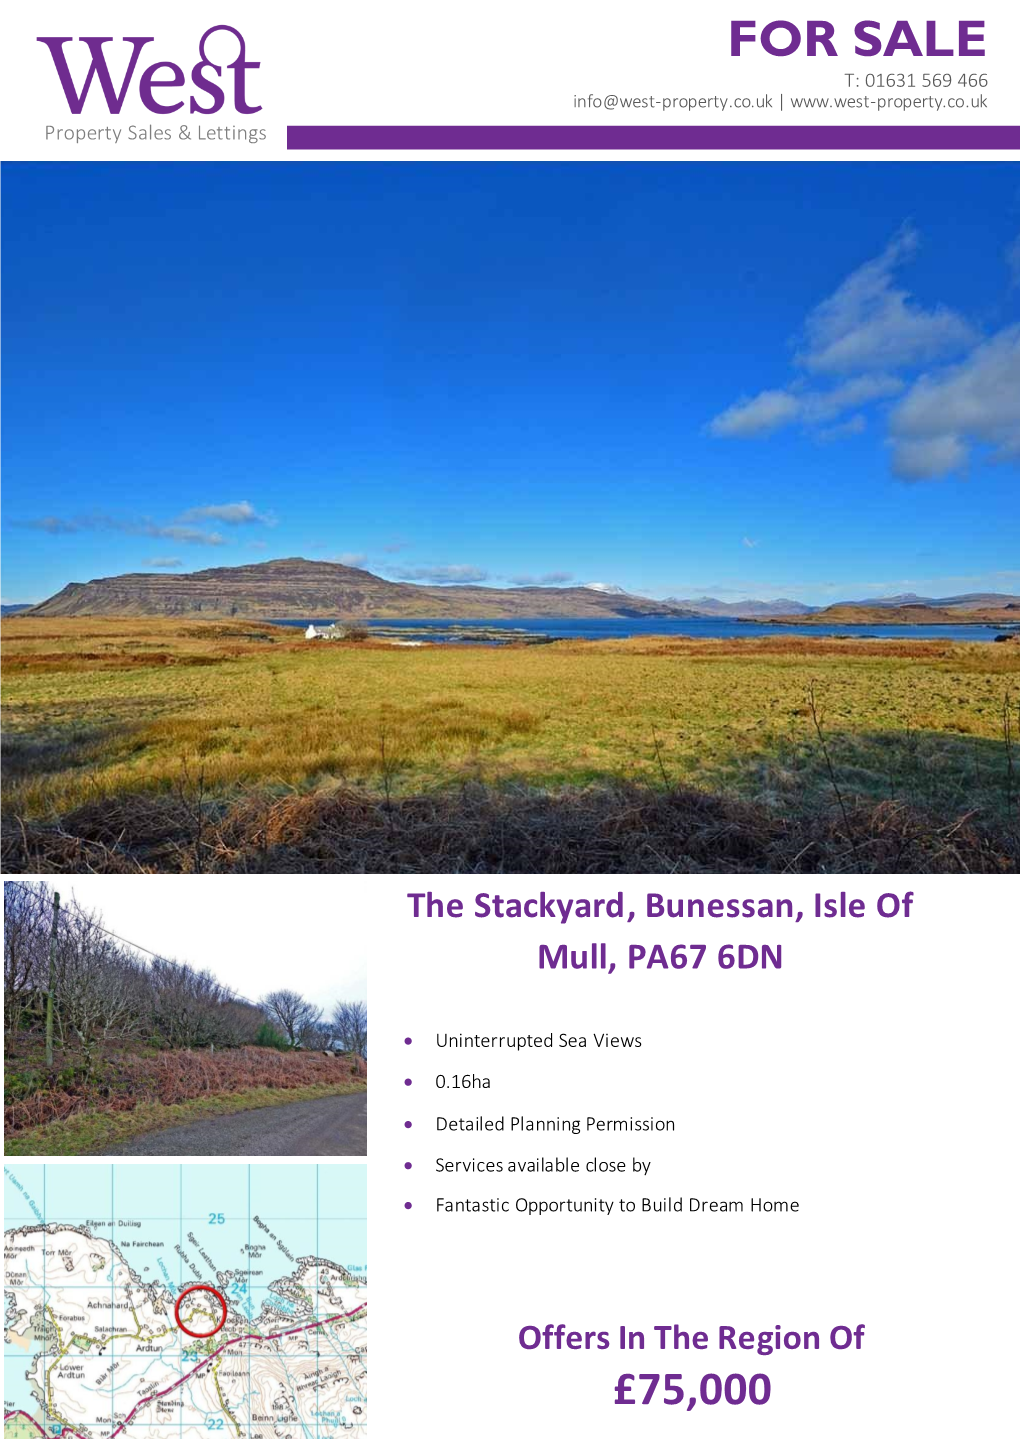 FOR SALE the Stackyard, Bunessan, Isle of Mull, PA67